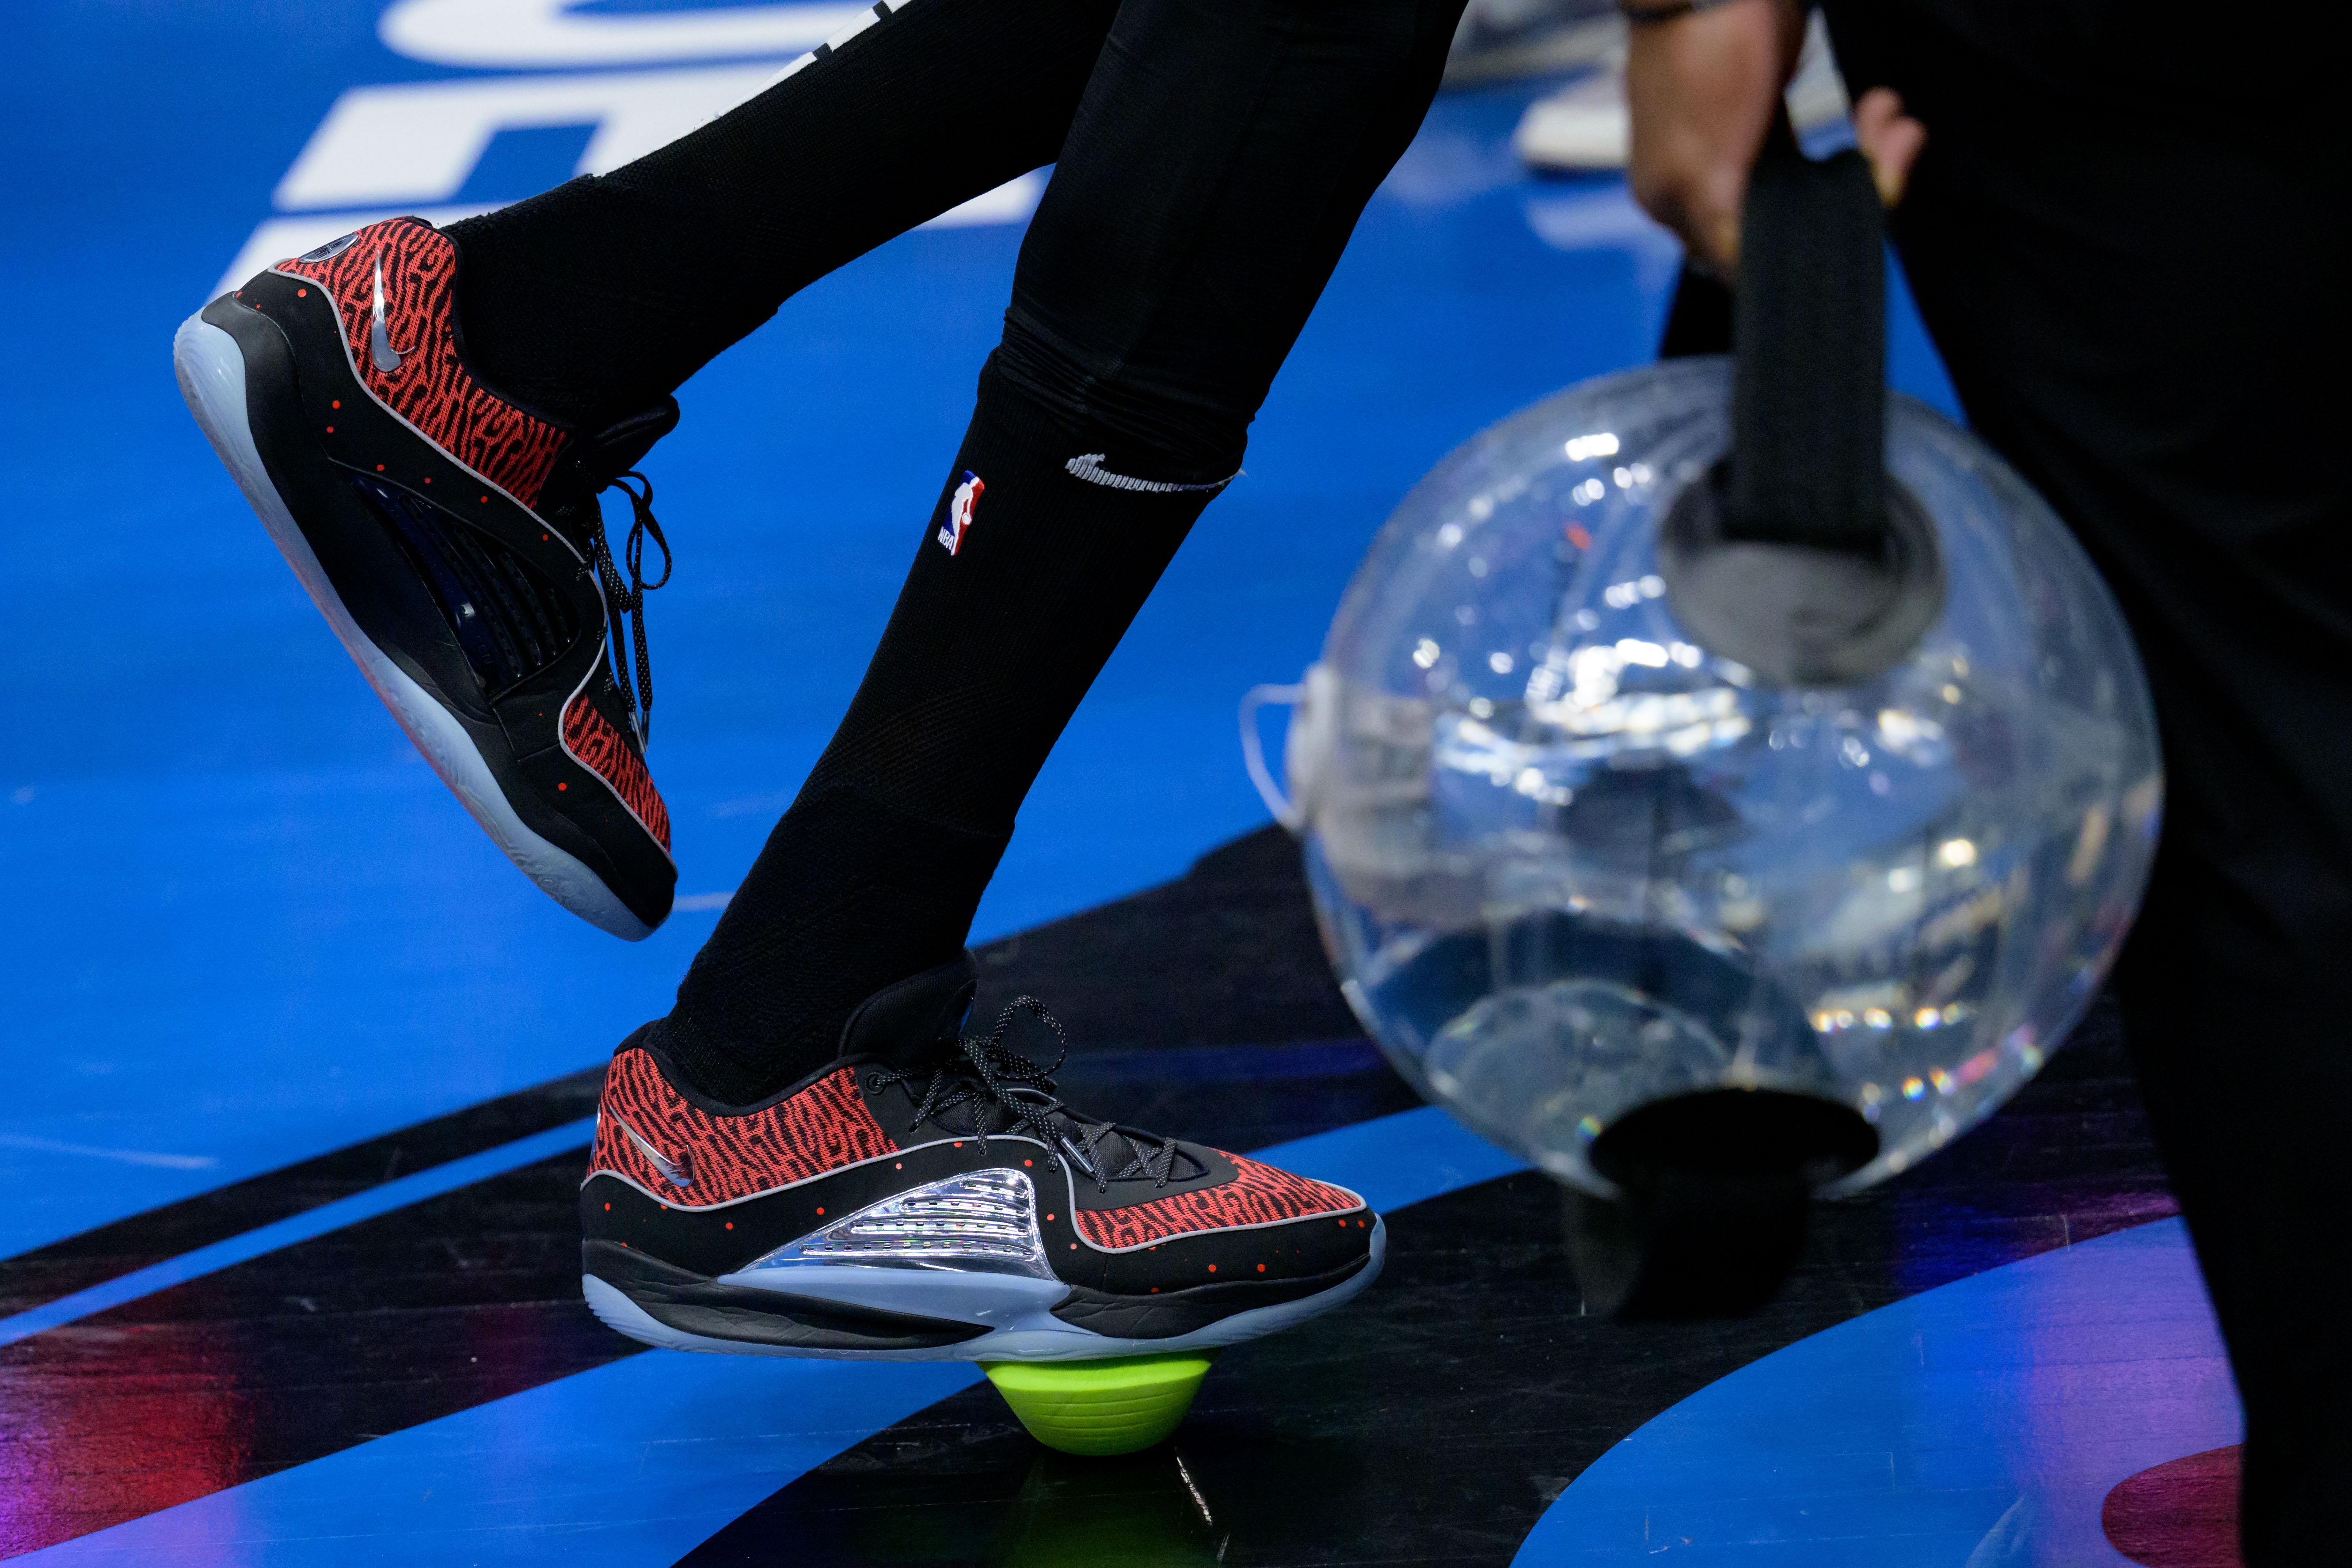 Phoenix Suns forward Kevin Durant's black and red Nike sneakers.